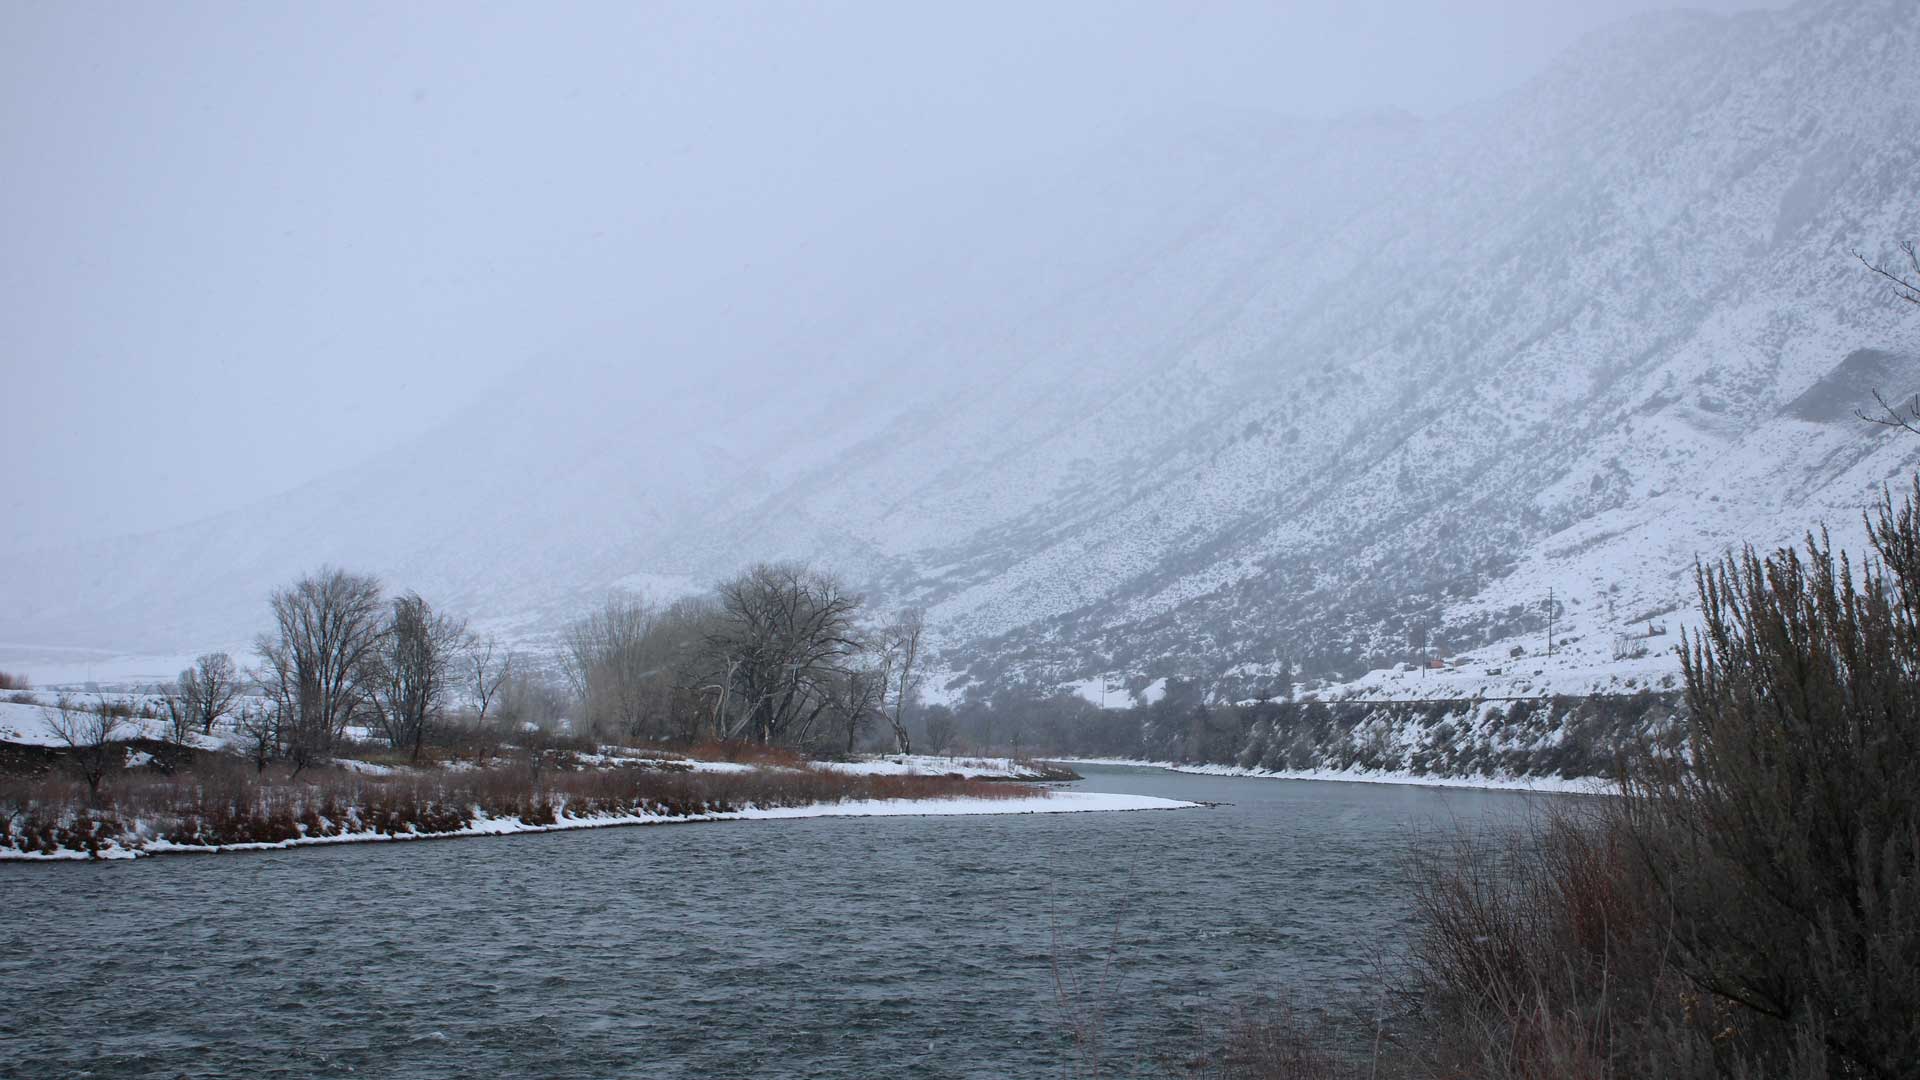 Snow falls on the Colorado River near New Castle, Colorado, on January 11, 2023. Months of snow and rain soaked a region in the grips of drought and helped replenish reservoirs along the Colorado River.
